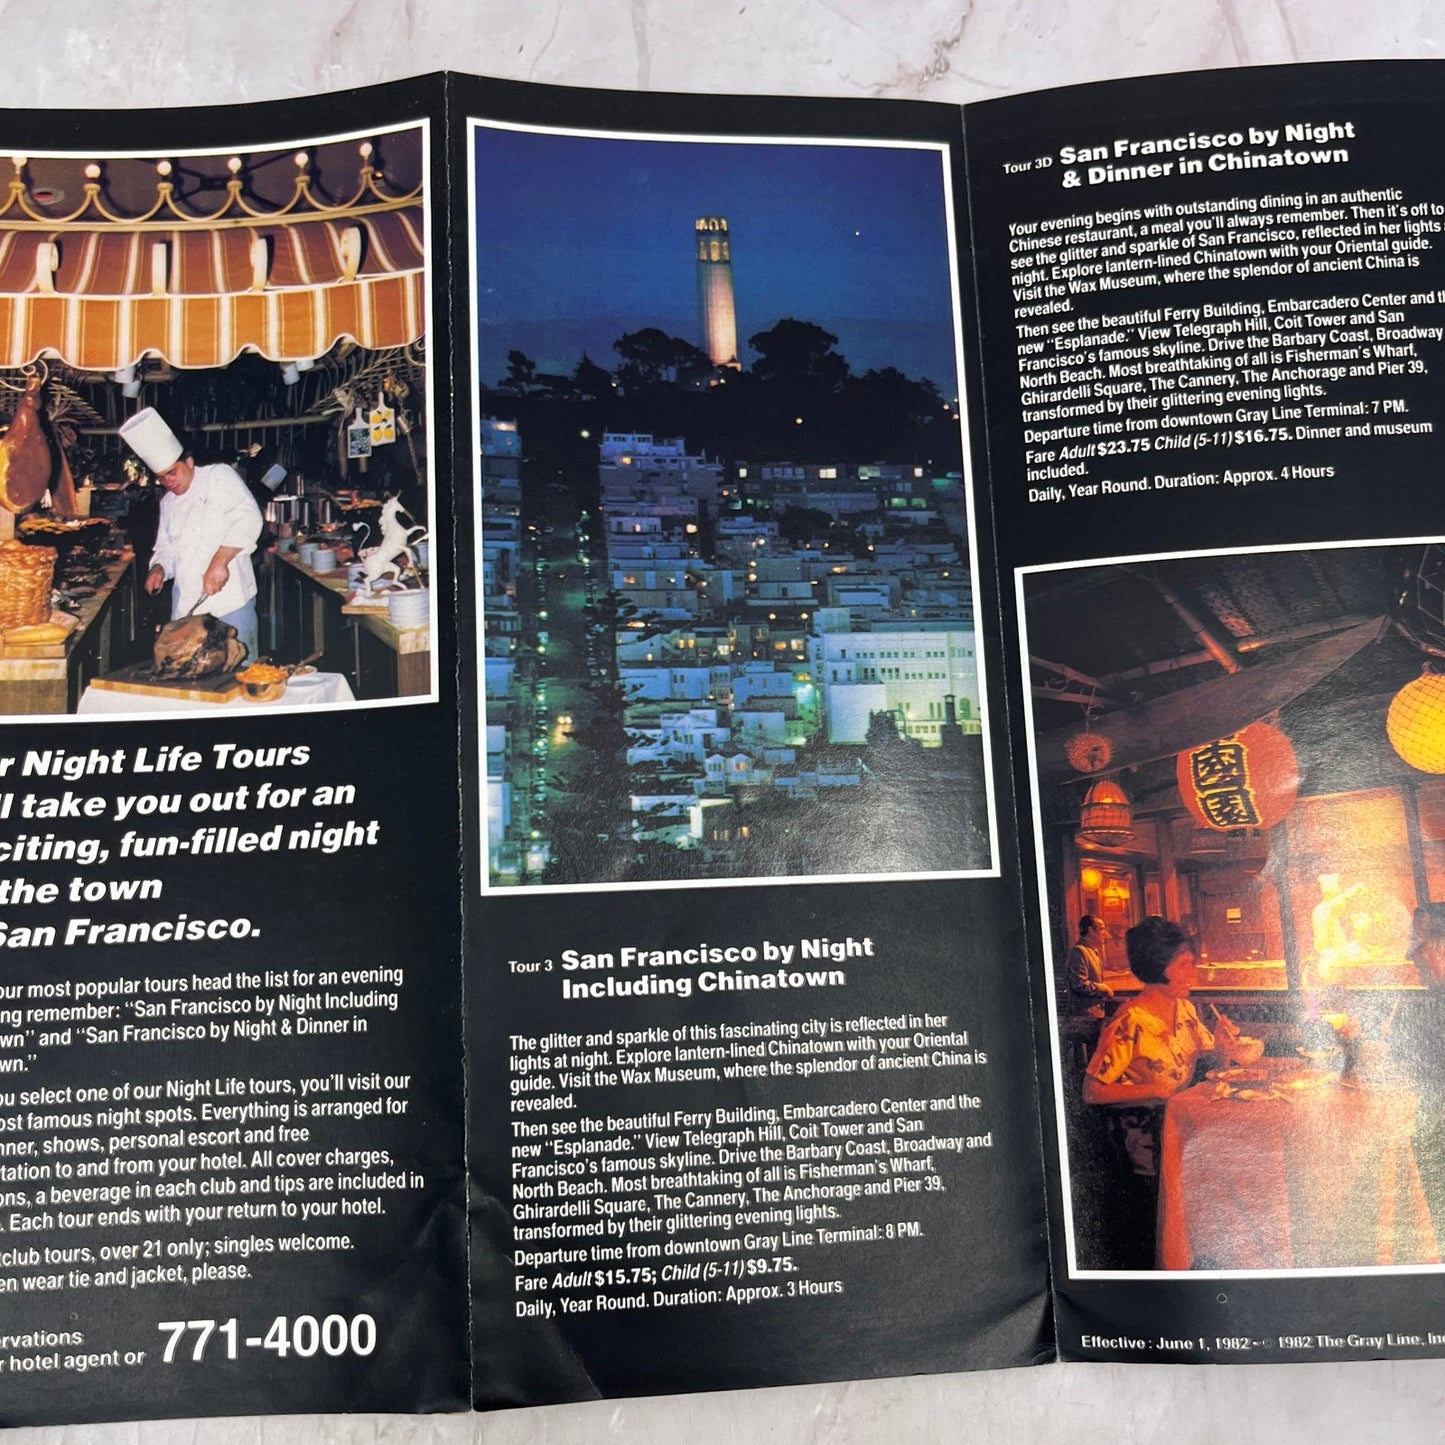 1970s Gray Line San Francisco Night Life Tours Fold Out Travel Brochure TH9-CB